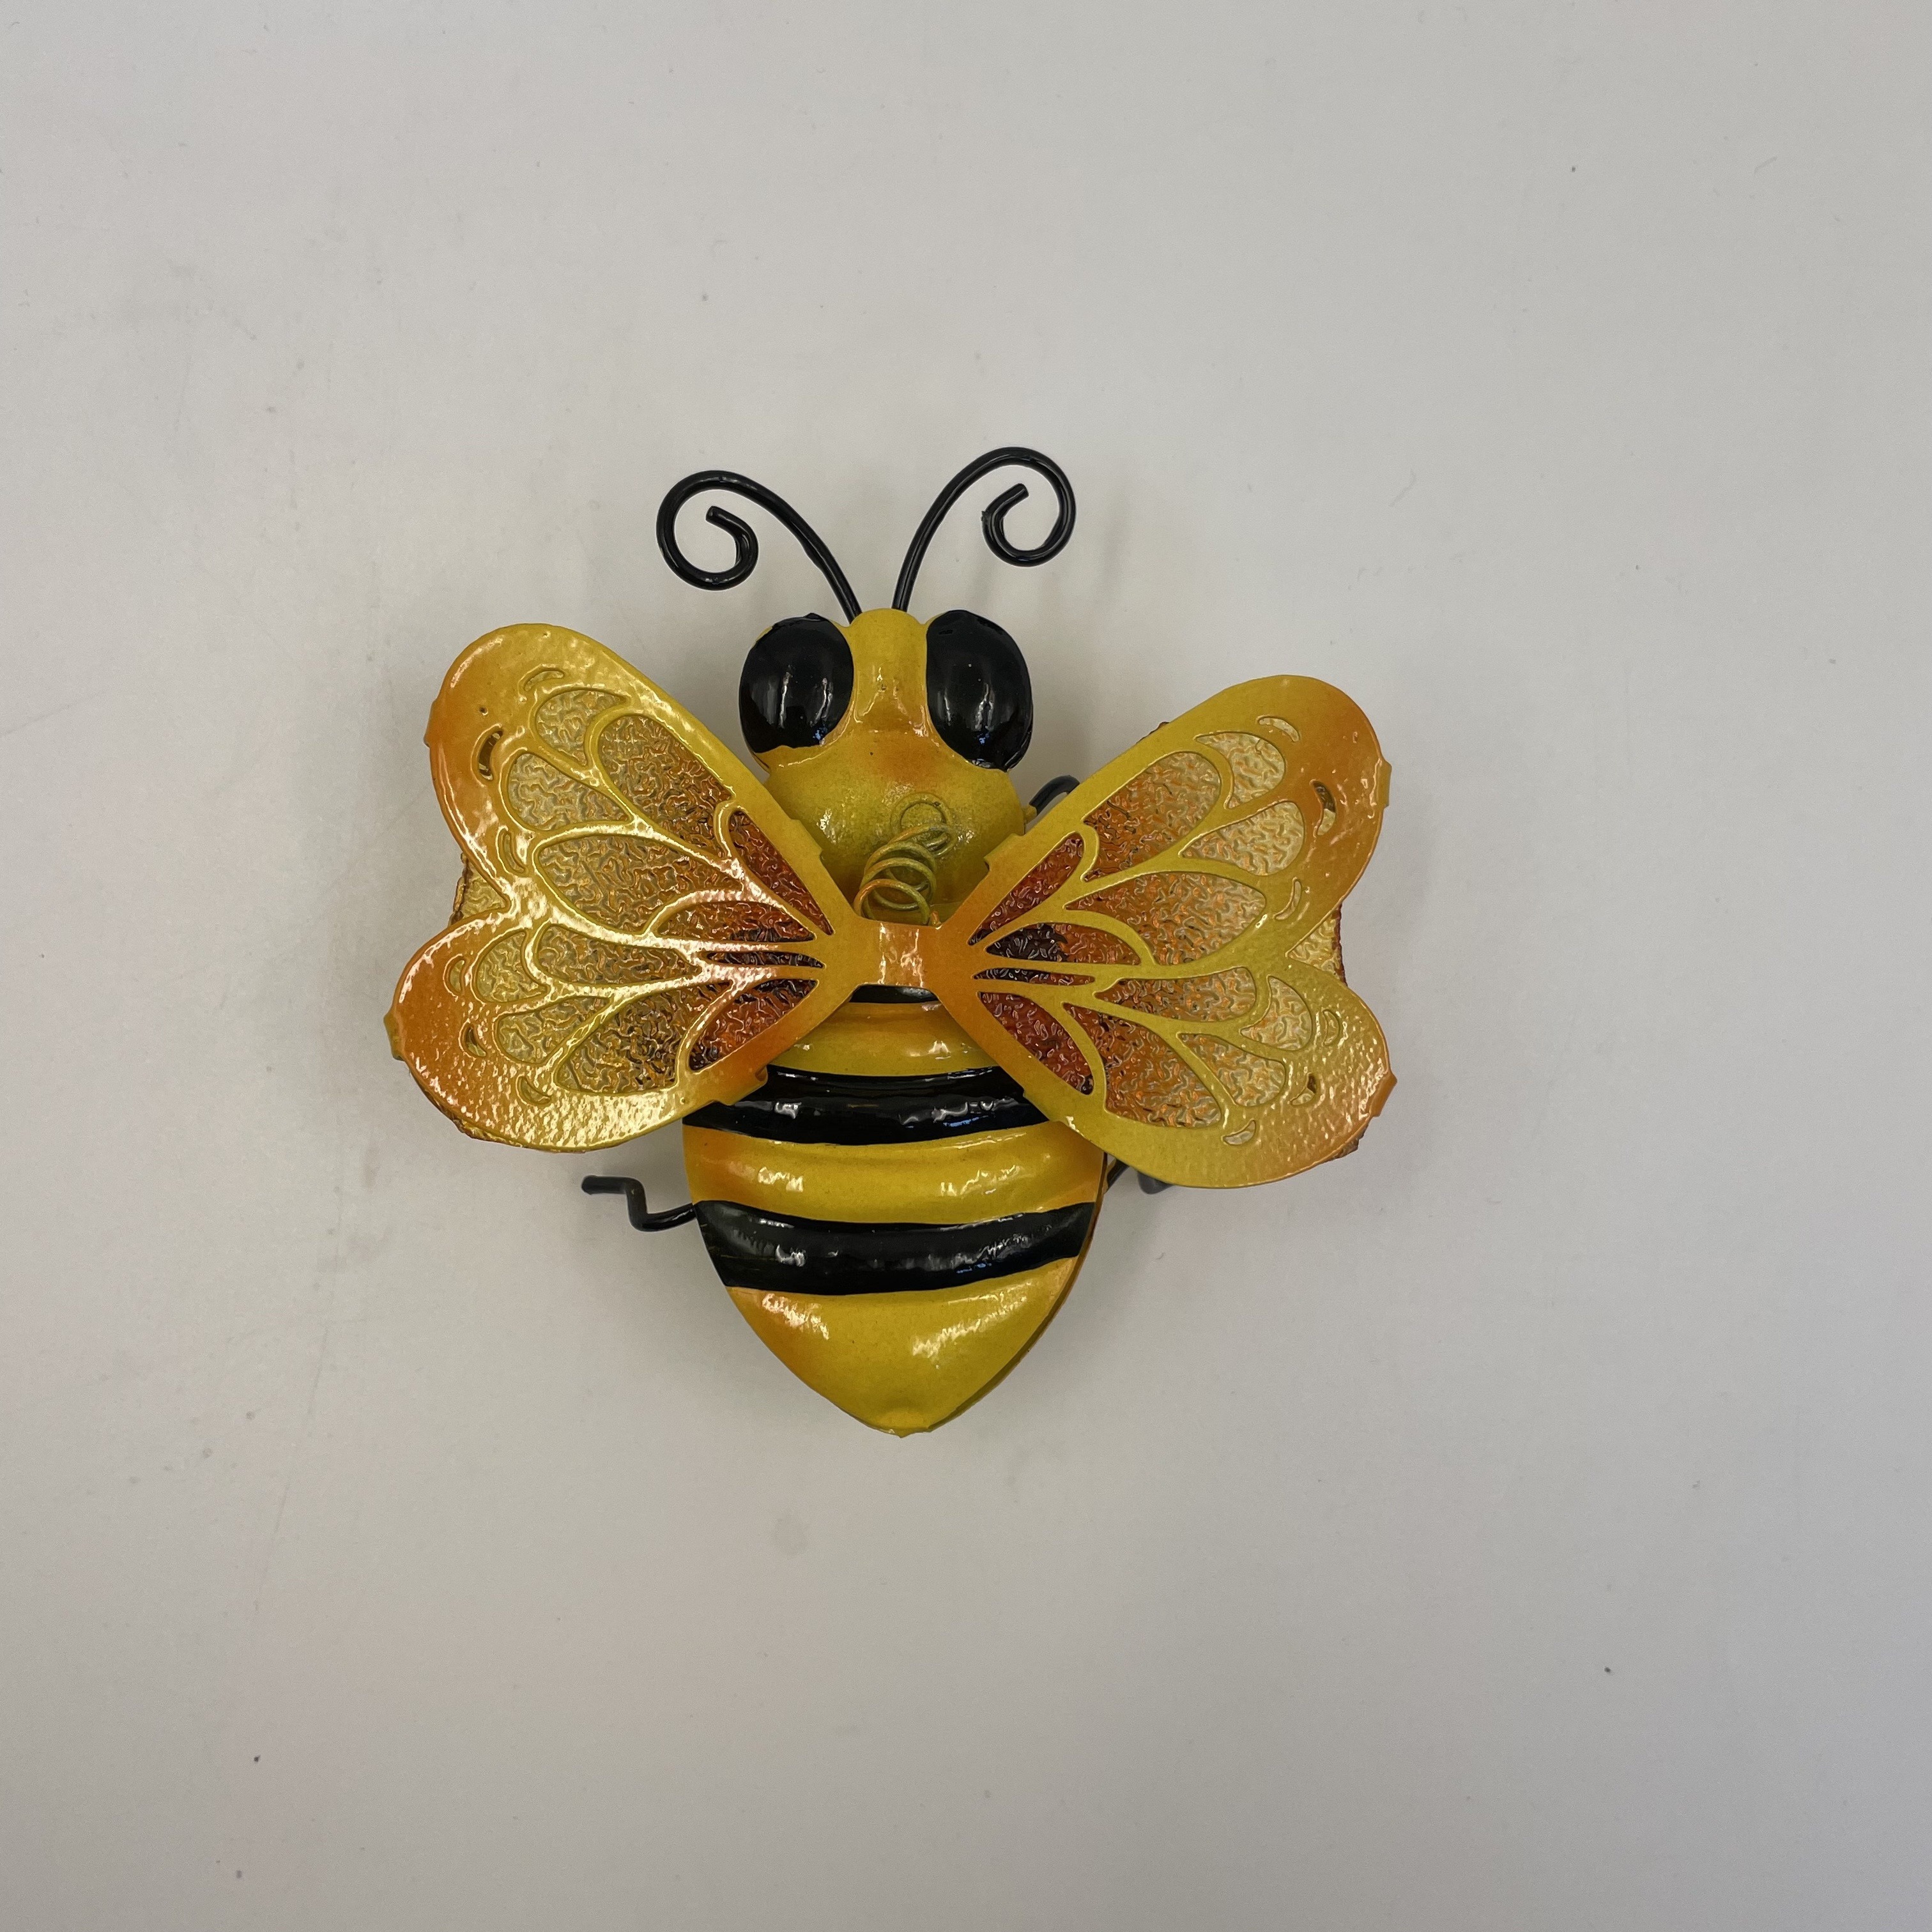 

1pc, Metal Bee Wall Decor, Garden Hanging Decorations Outdoor, Indoor Room Glass Decorative Artwork, Yard Art Sculpture Ornaments Outside For Fence,patio,porch